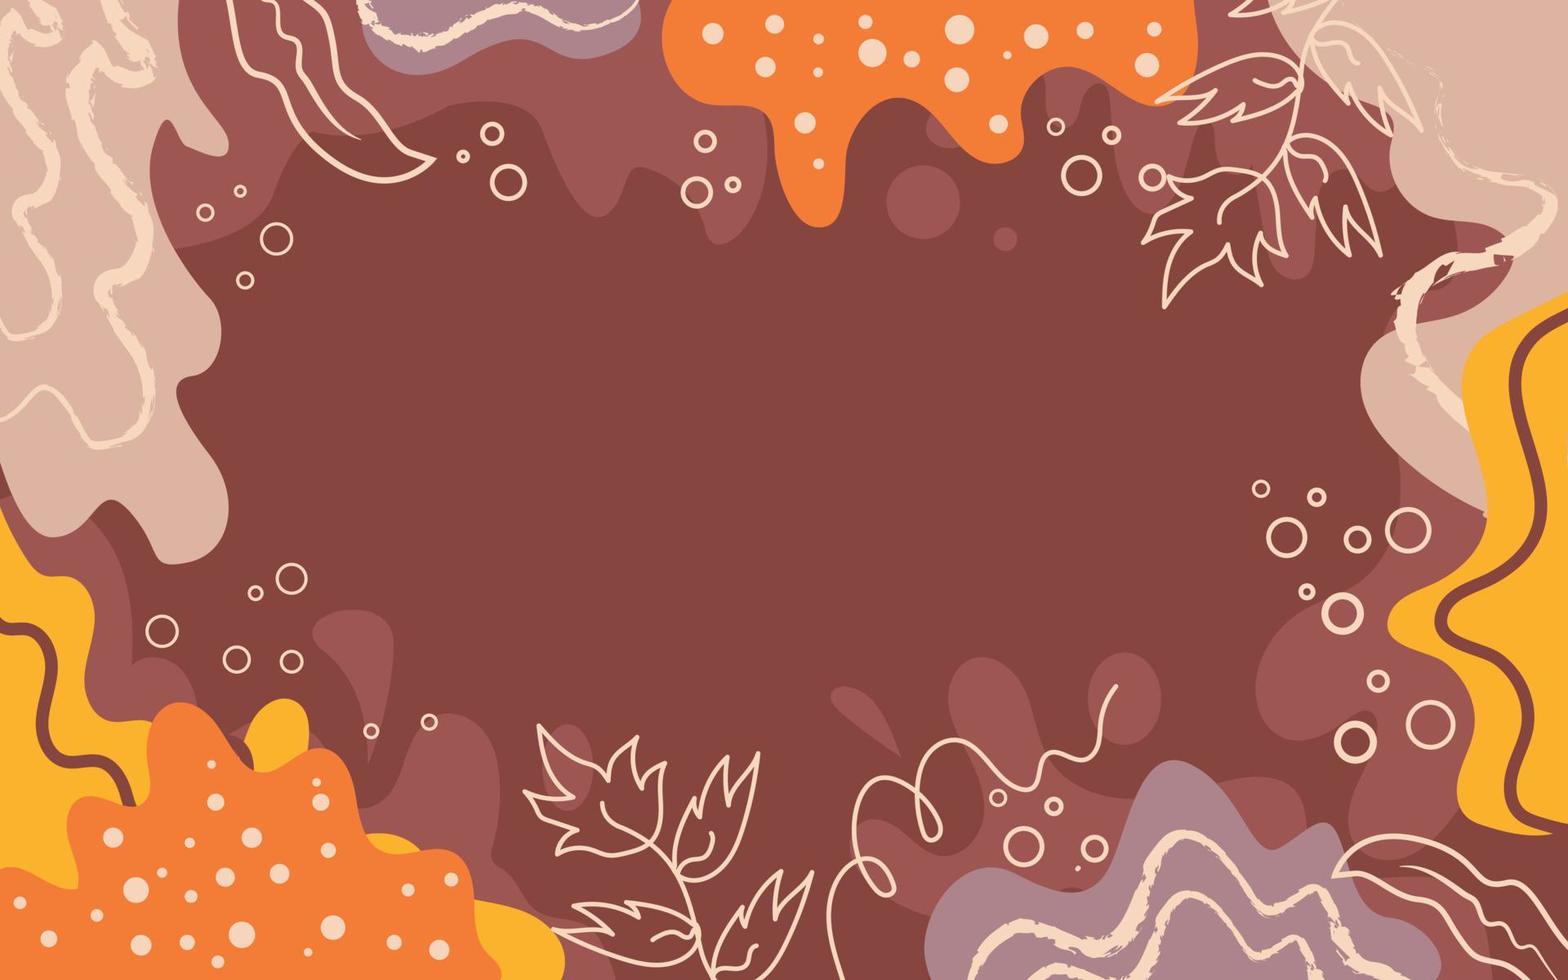 Hand drawn abstract nature doodle background vector